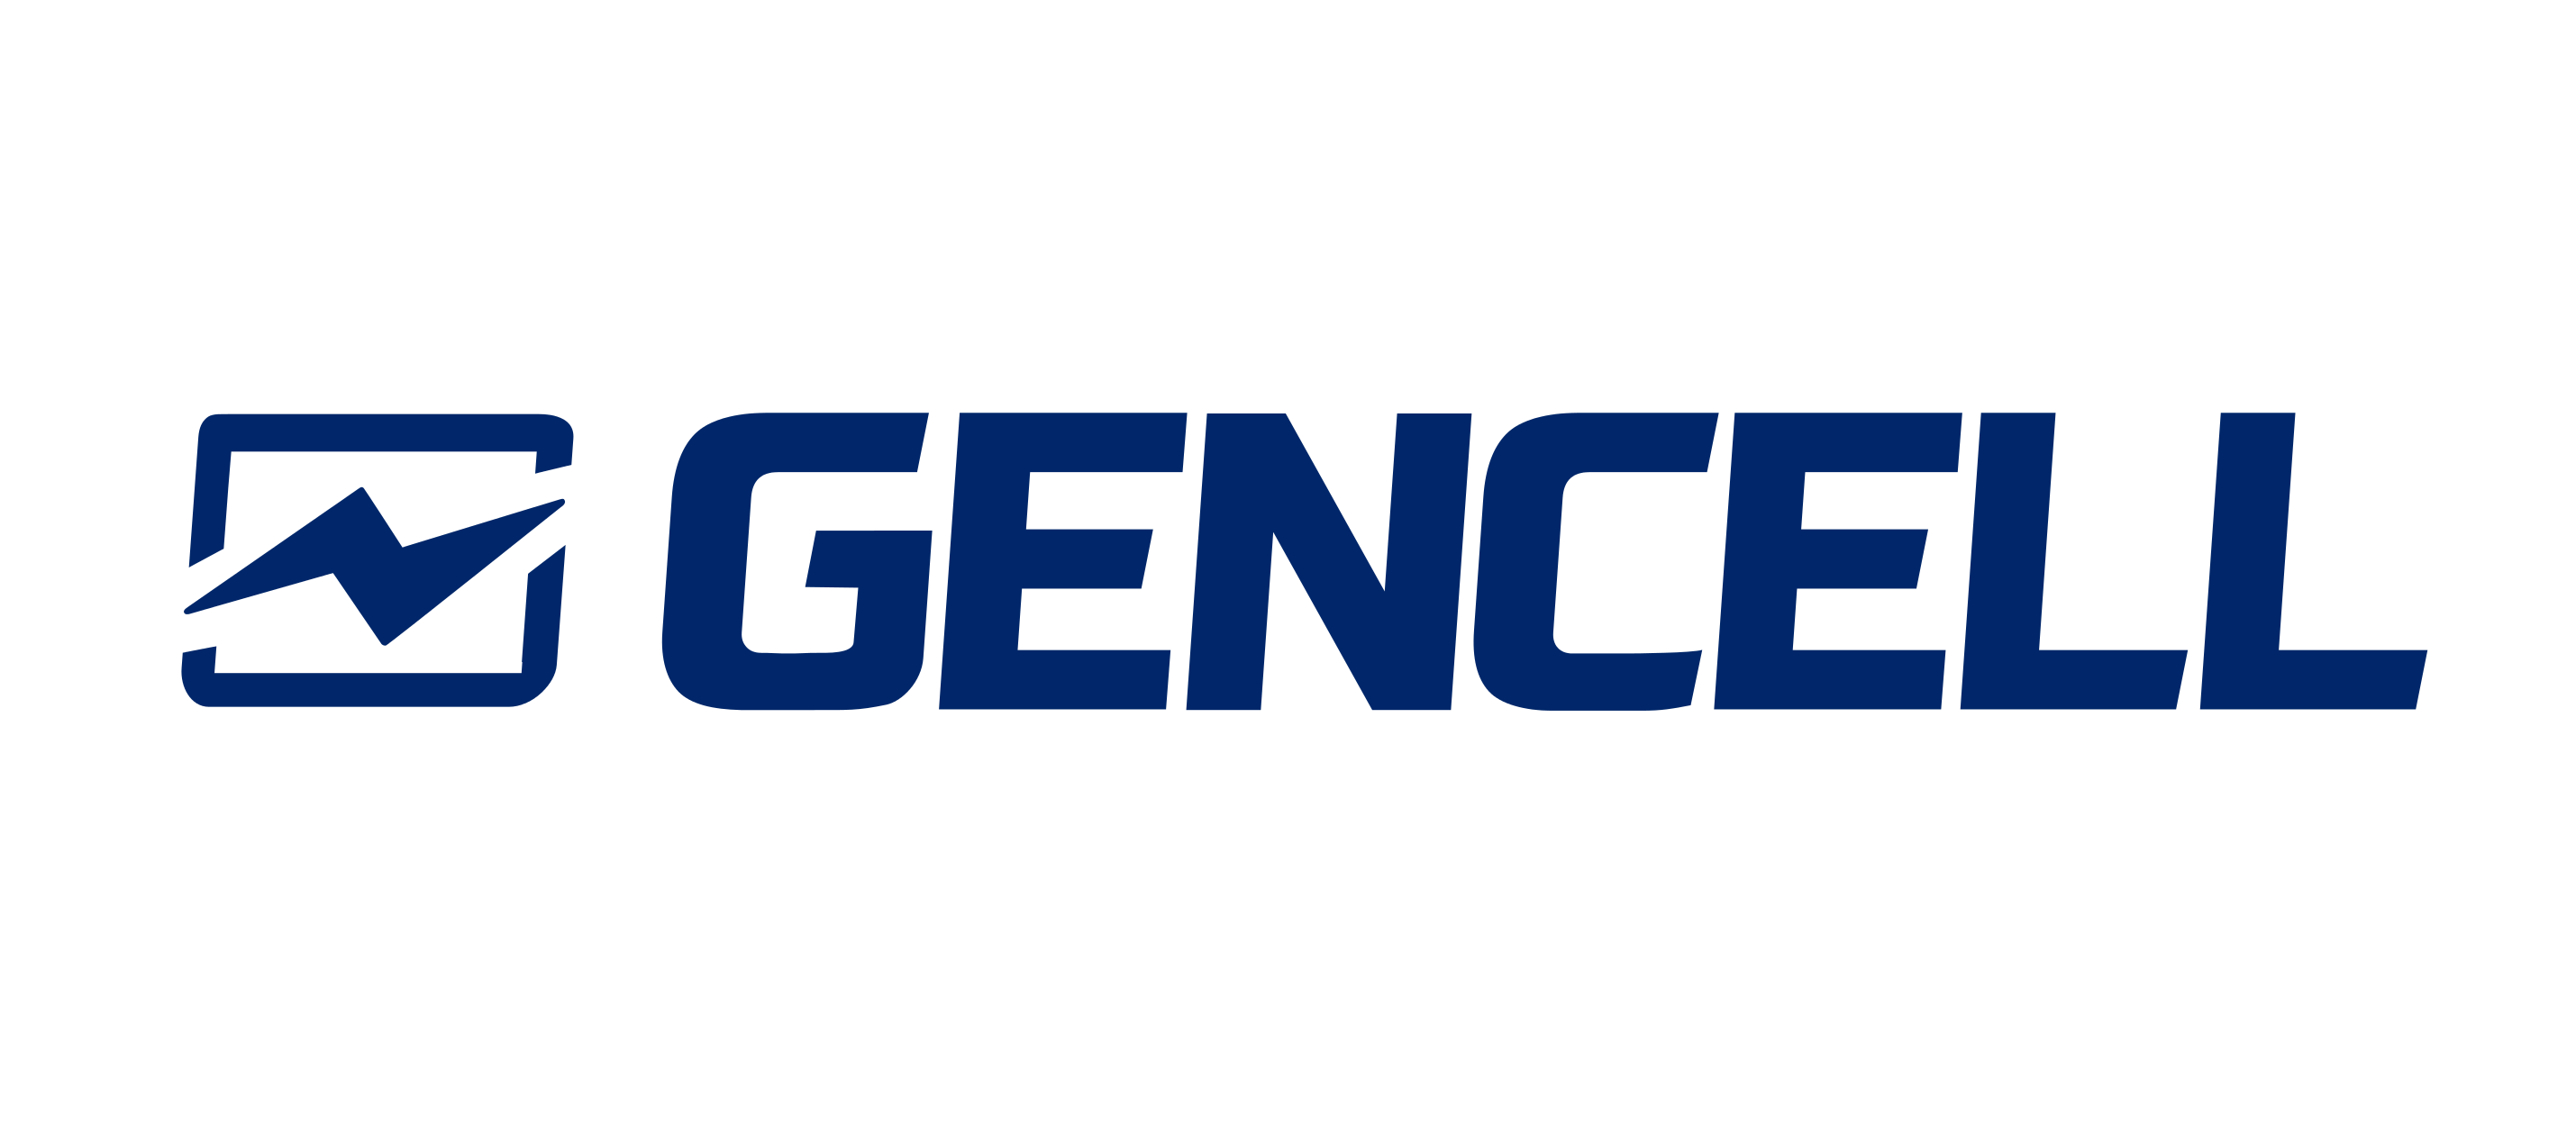 GENCELL - Energie durable